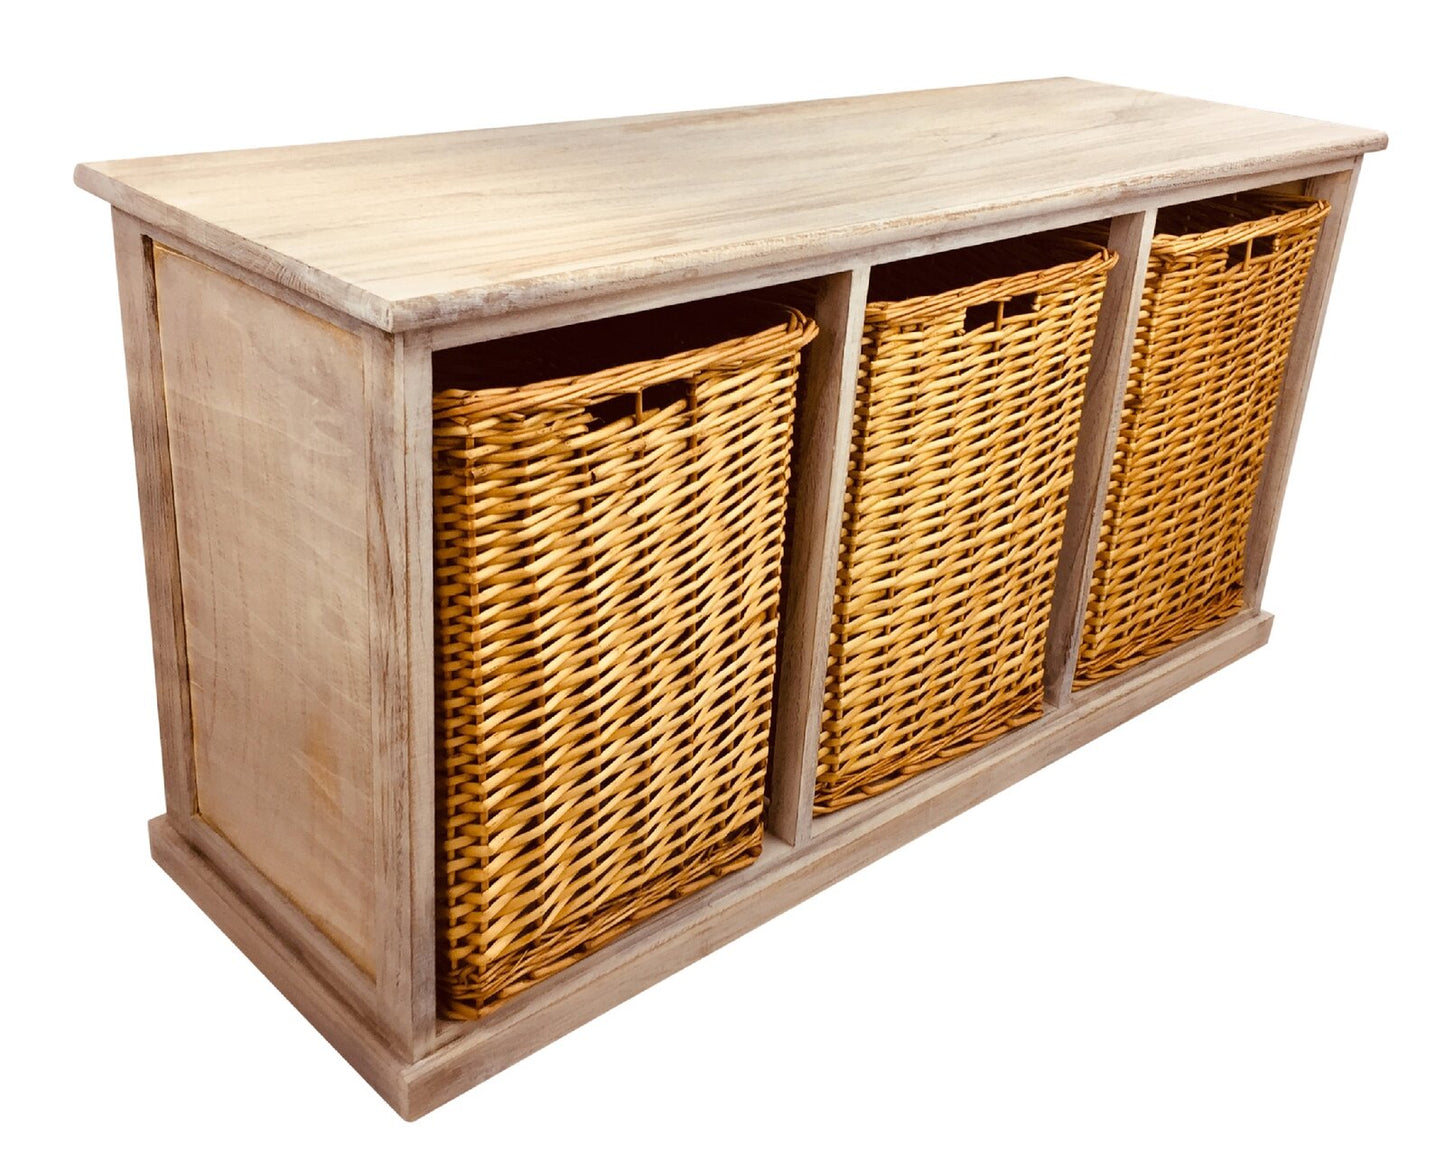 Wooden Storage Bench With 3 Large Baskets 101cm